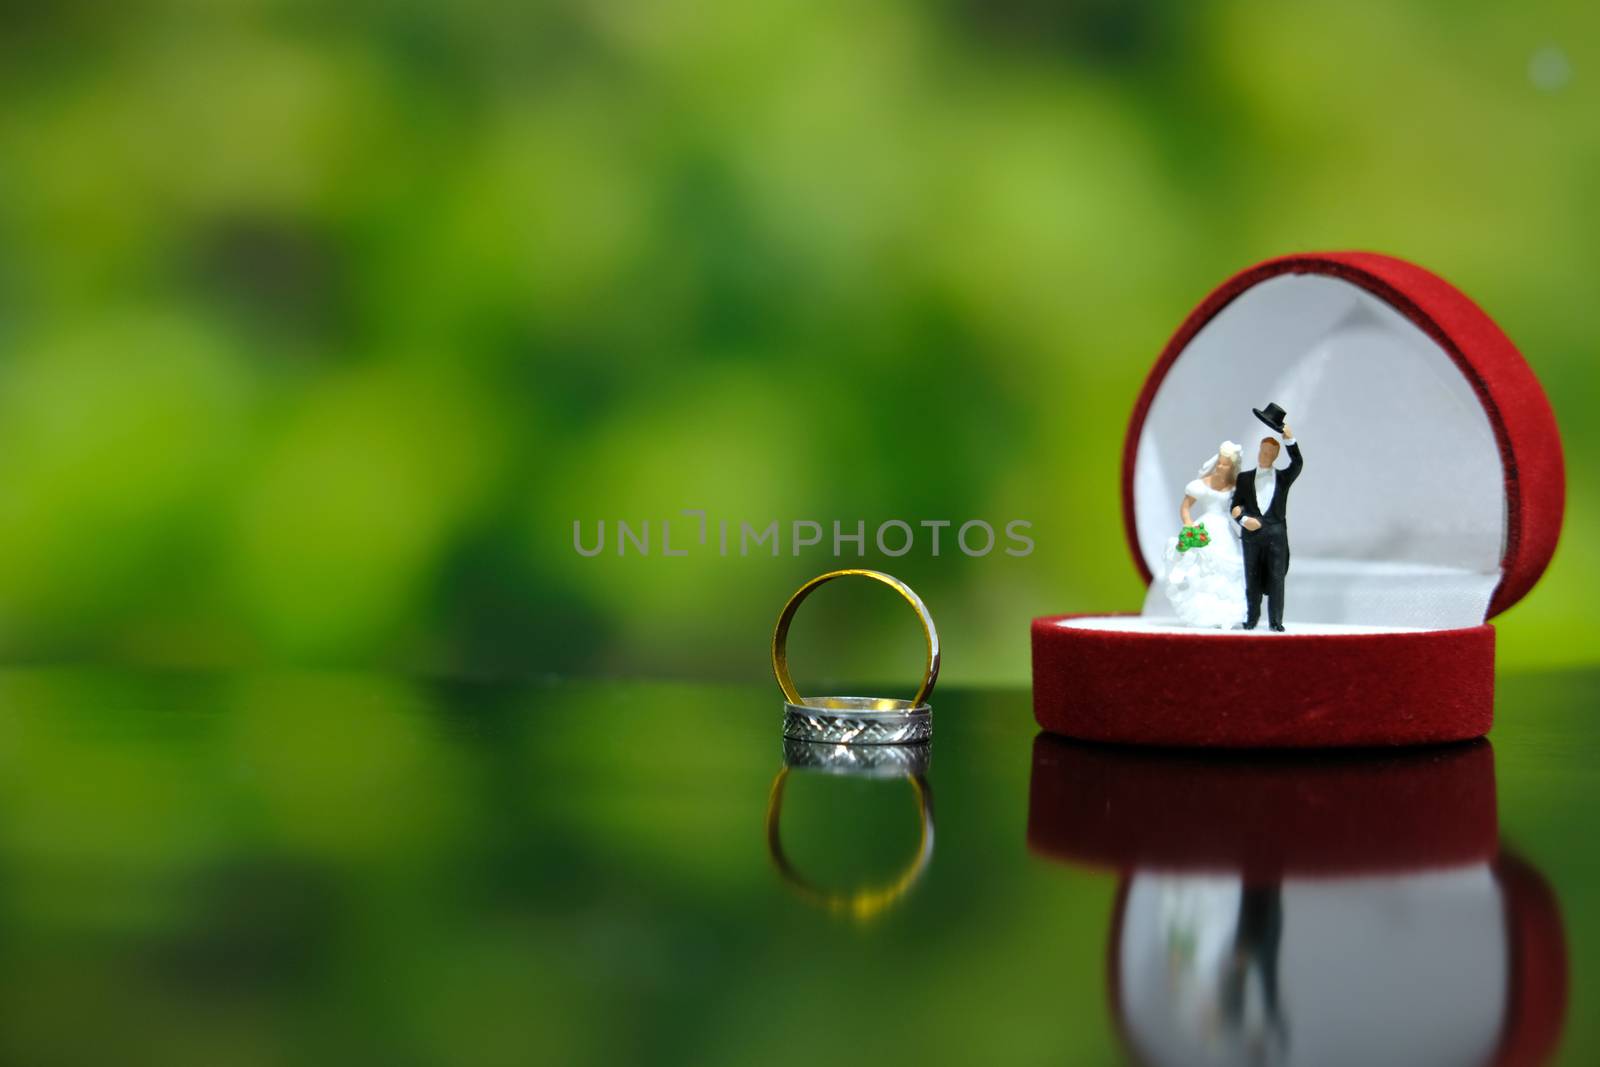 Miniature wedding concept. Bride and groom make greeting from above opened heart ring box. image photo by Macrostud